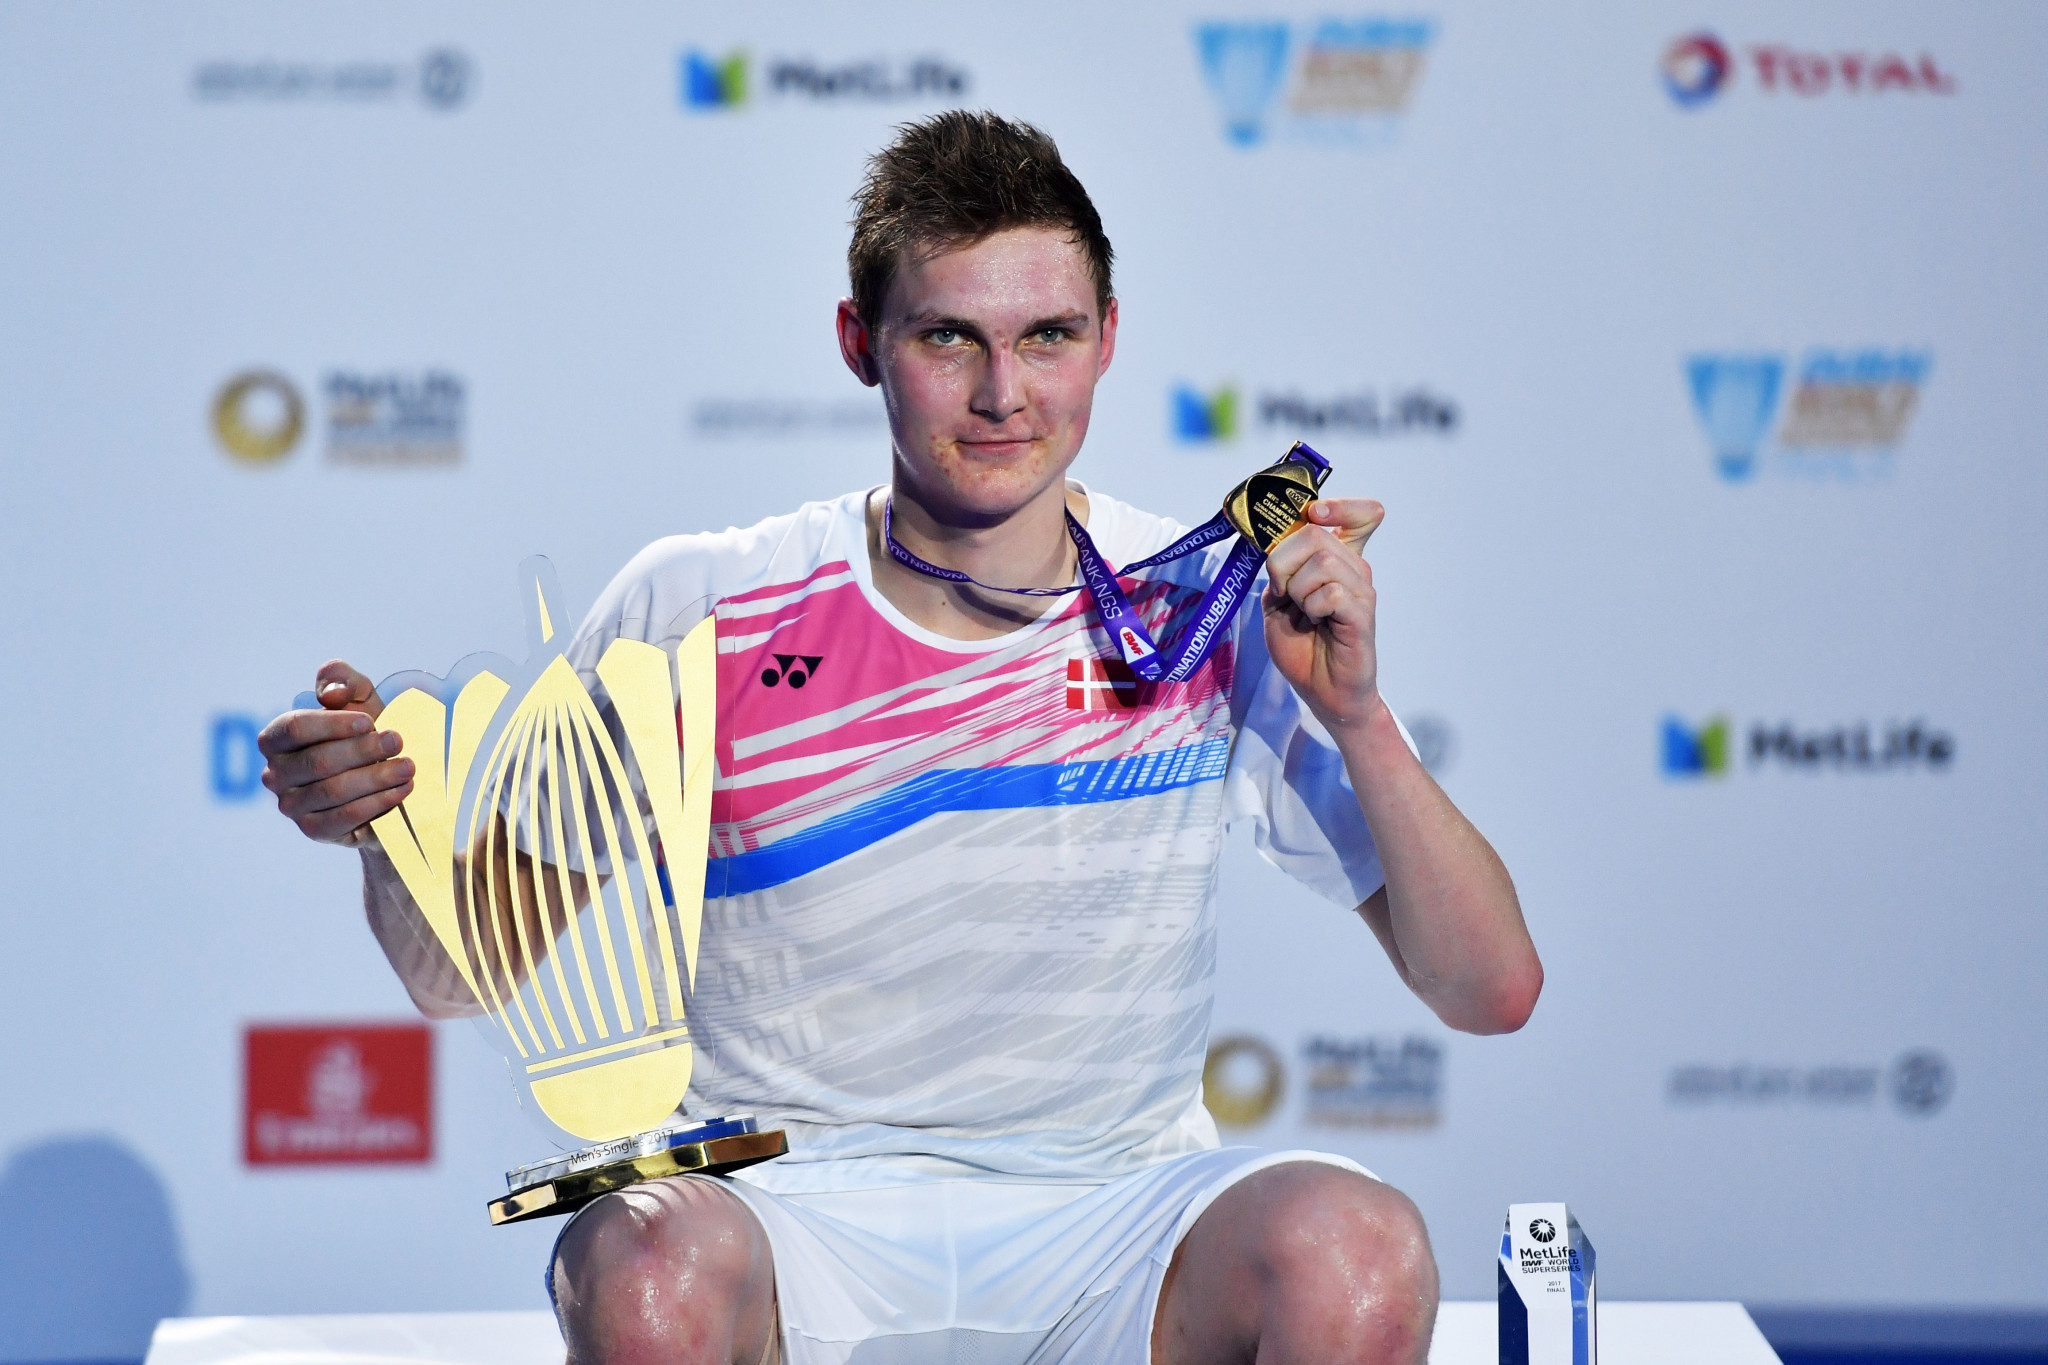 Rio 2016 silver medallist Viktor Axelsen beat Lee Chong Wei in the men's singles final of the BWF Super Series ©Getty Images